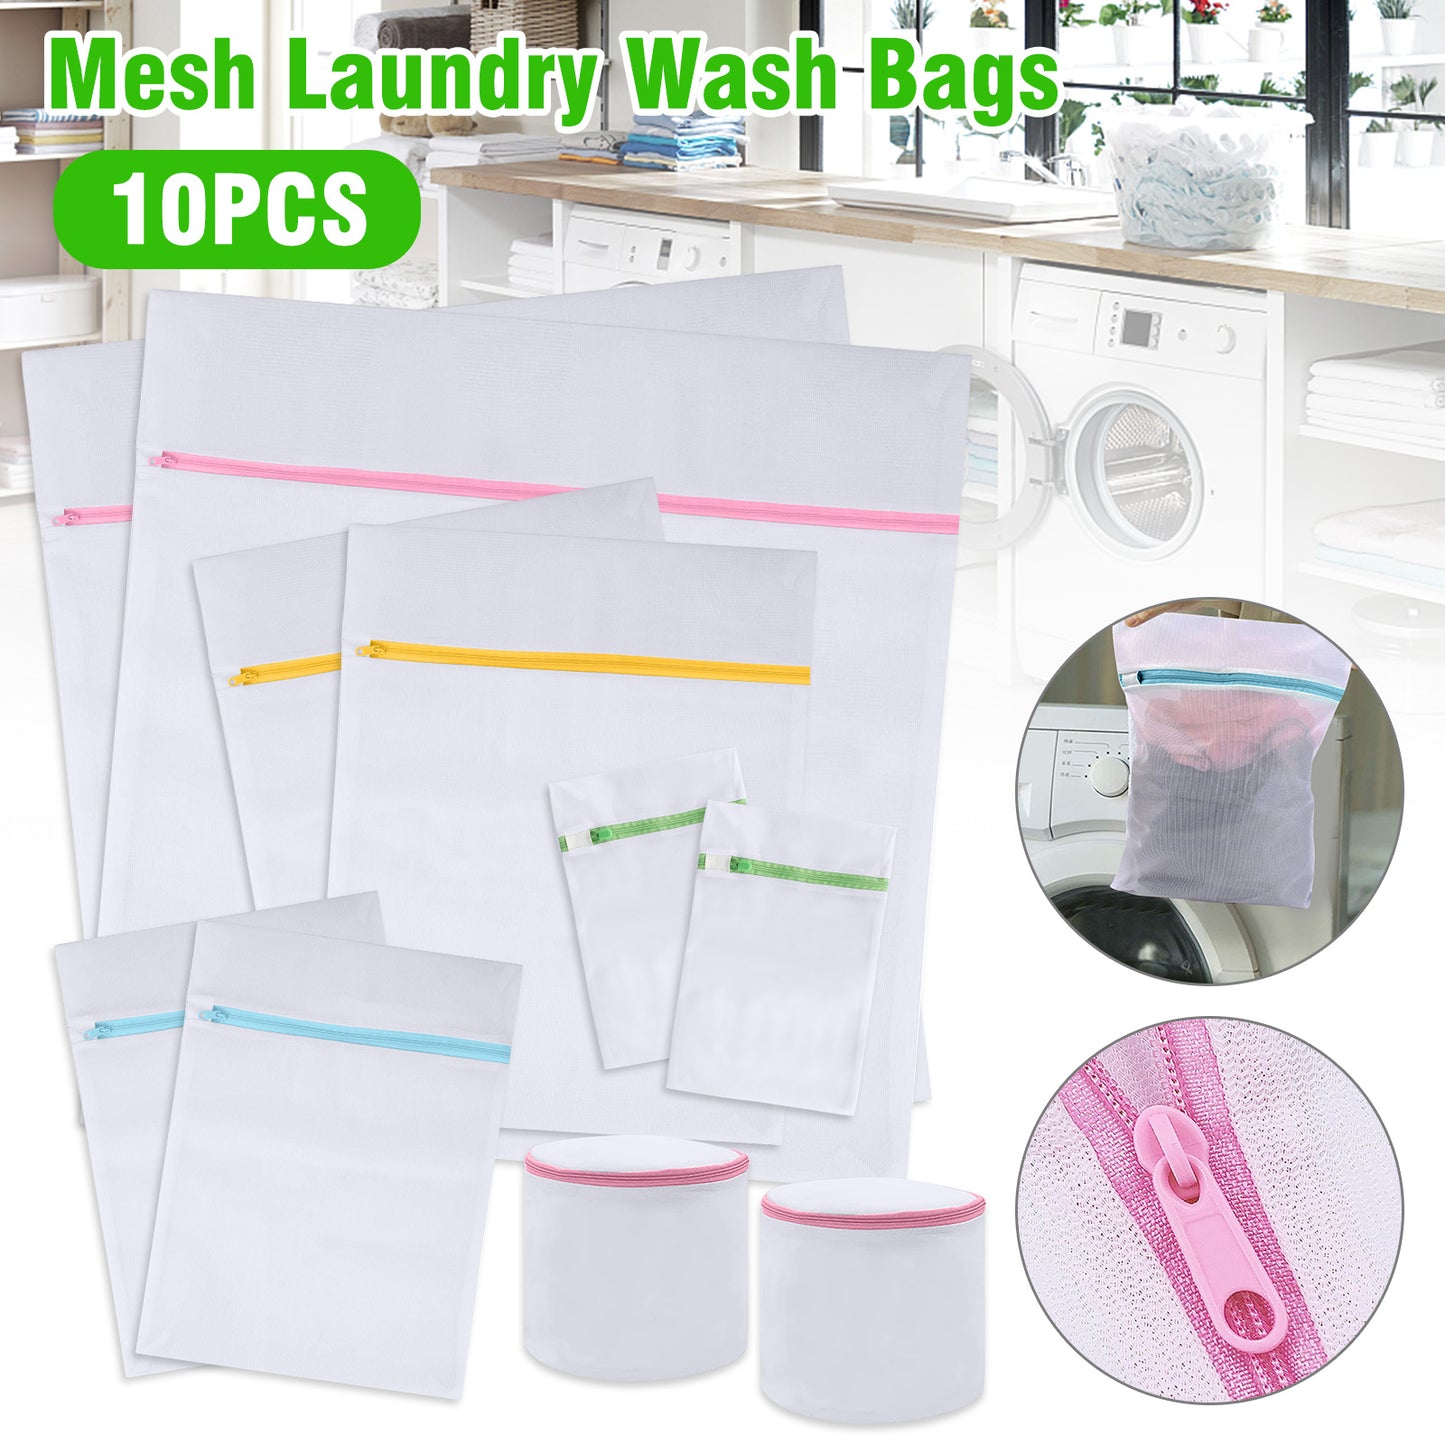 Mesh Laundry Wash Bags with good quality zippers